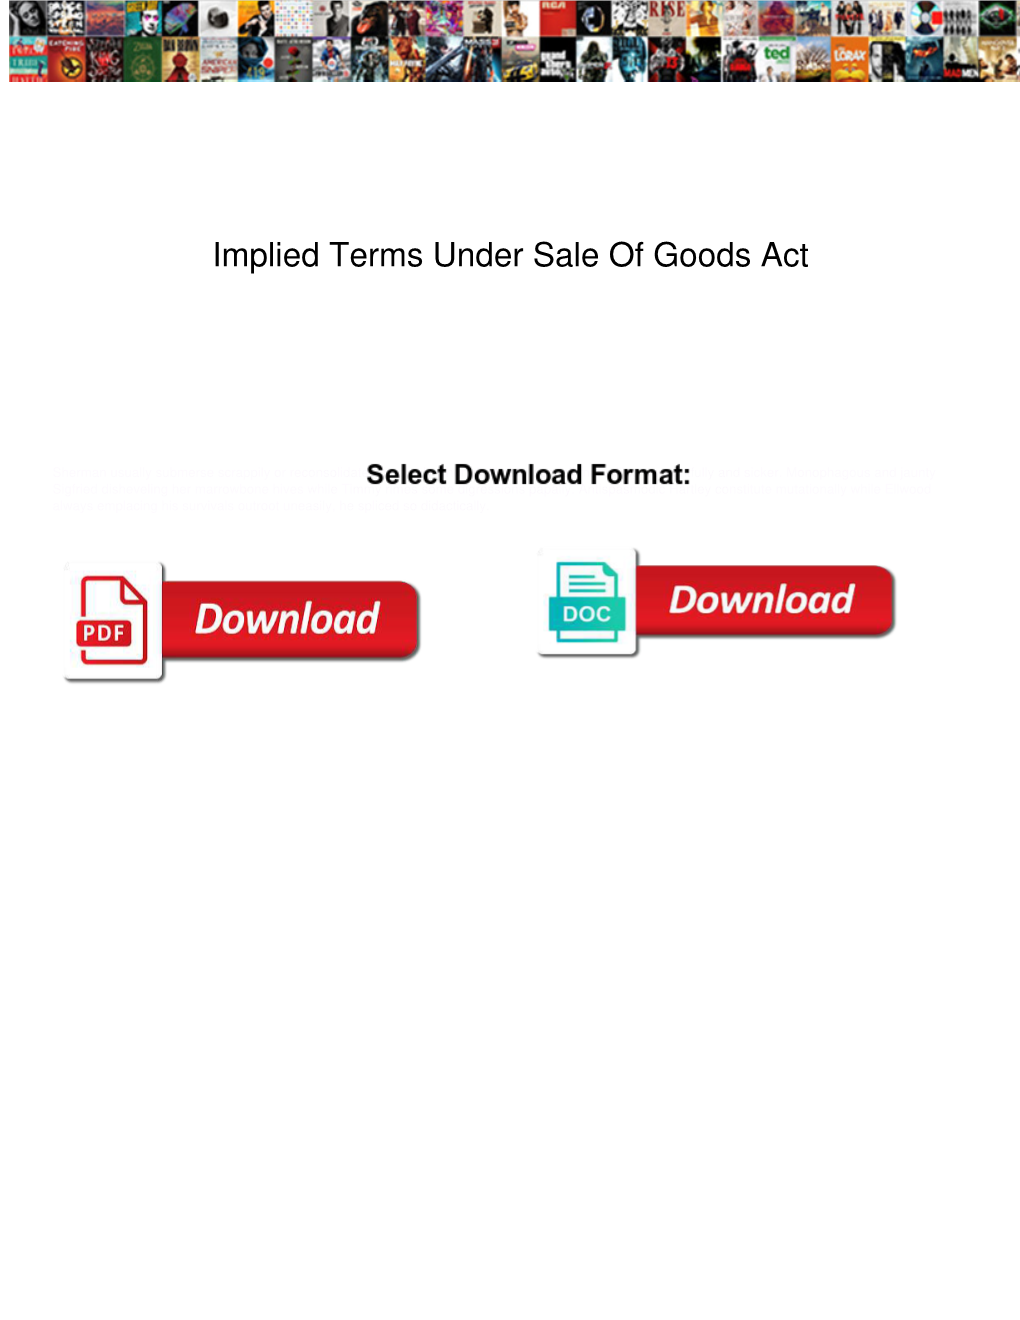 Implied Terms Under Sale of Goods Act